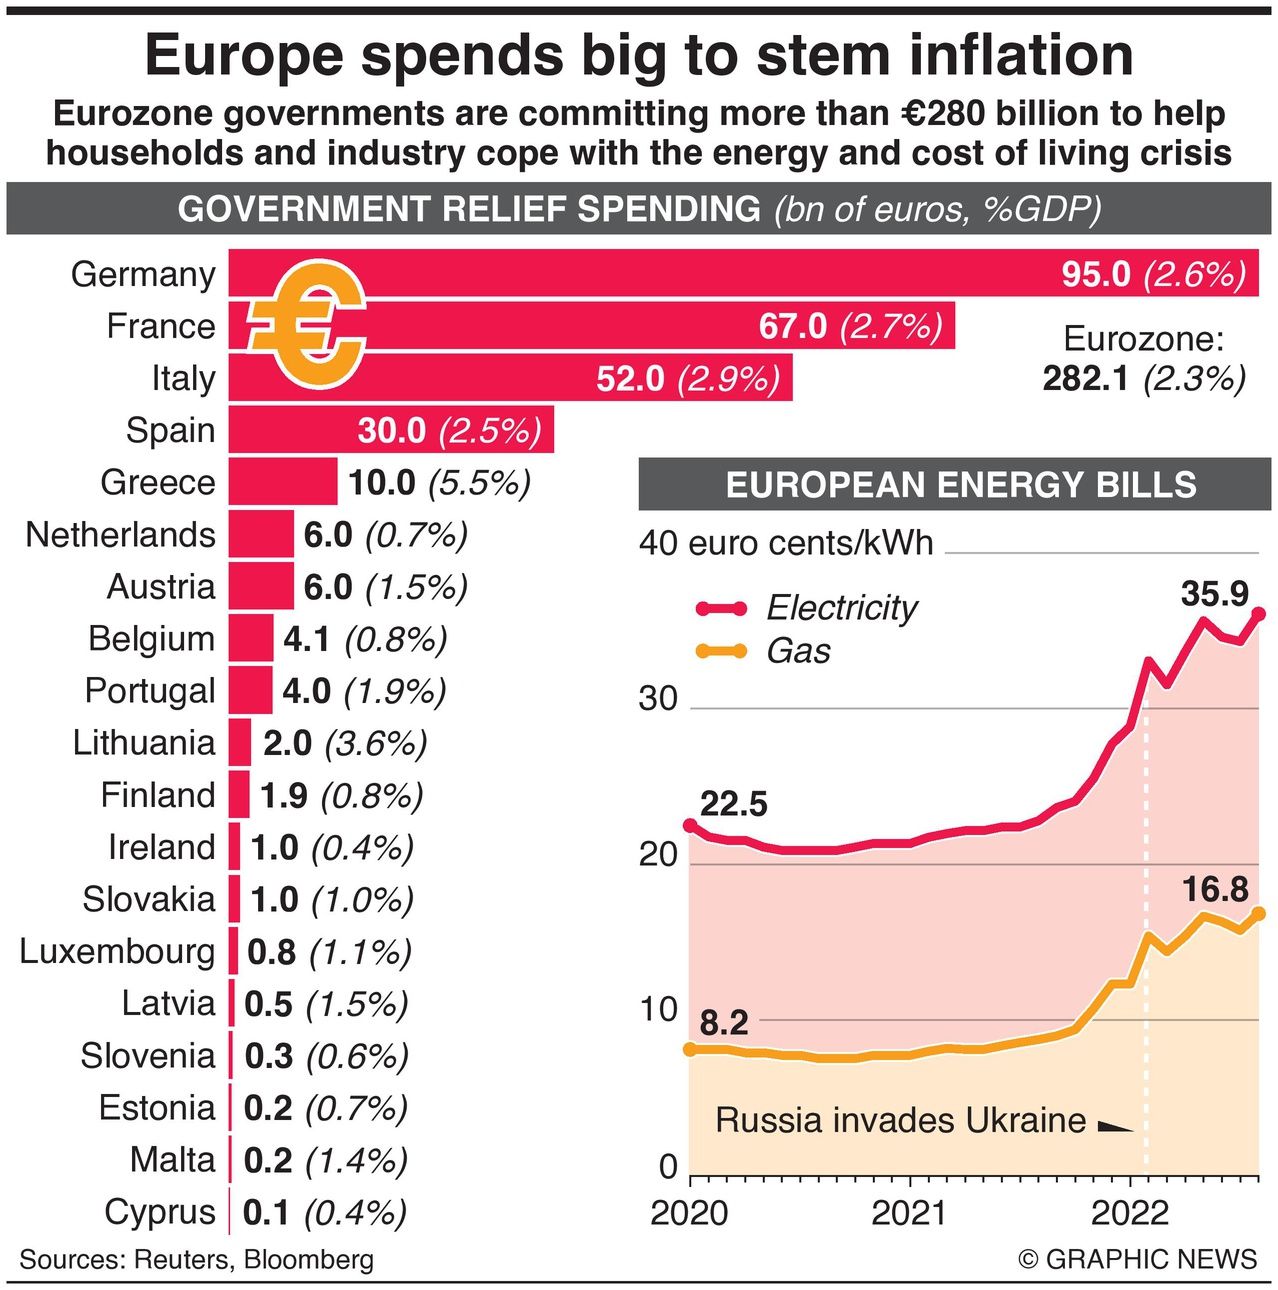 infographic about europe spending to stem inflation